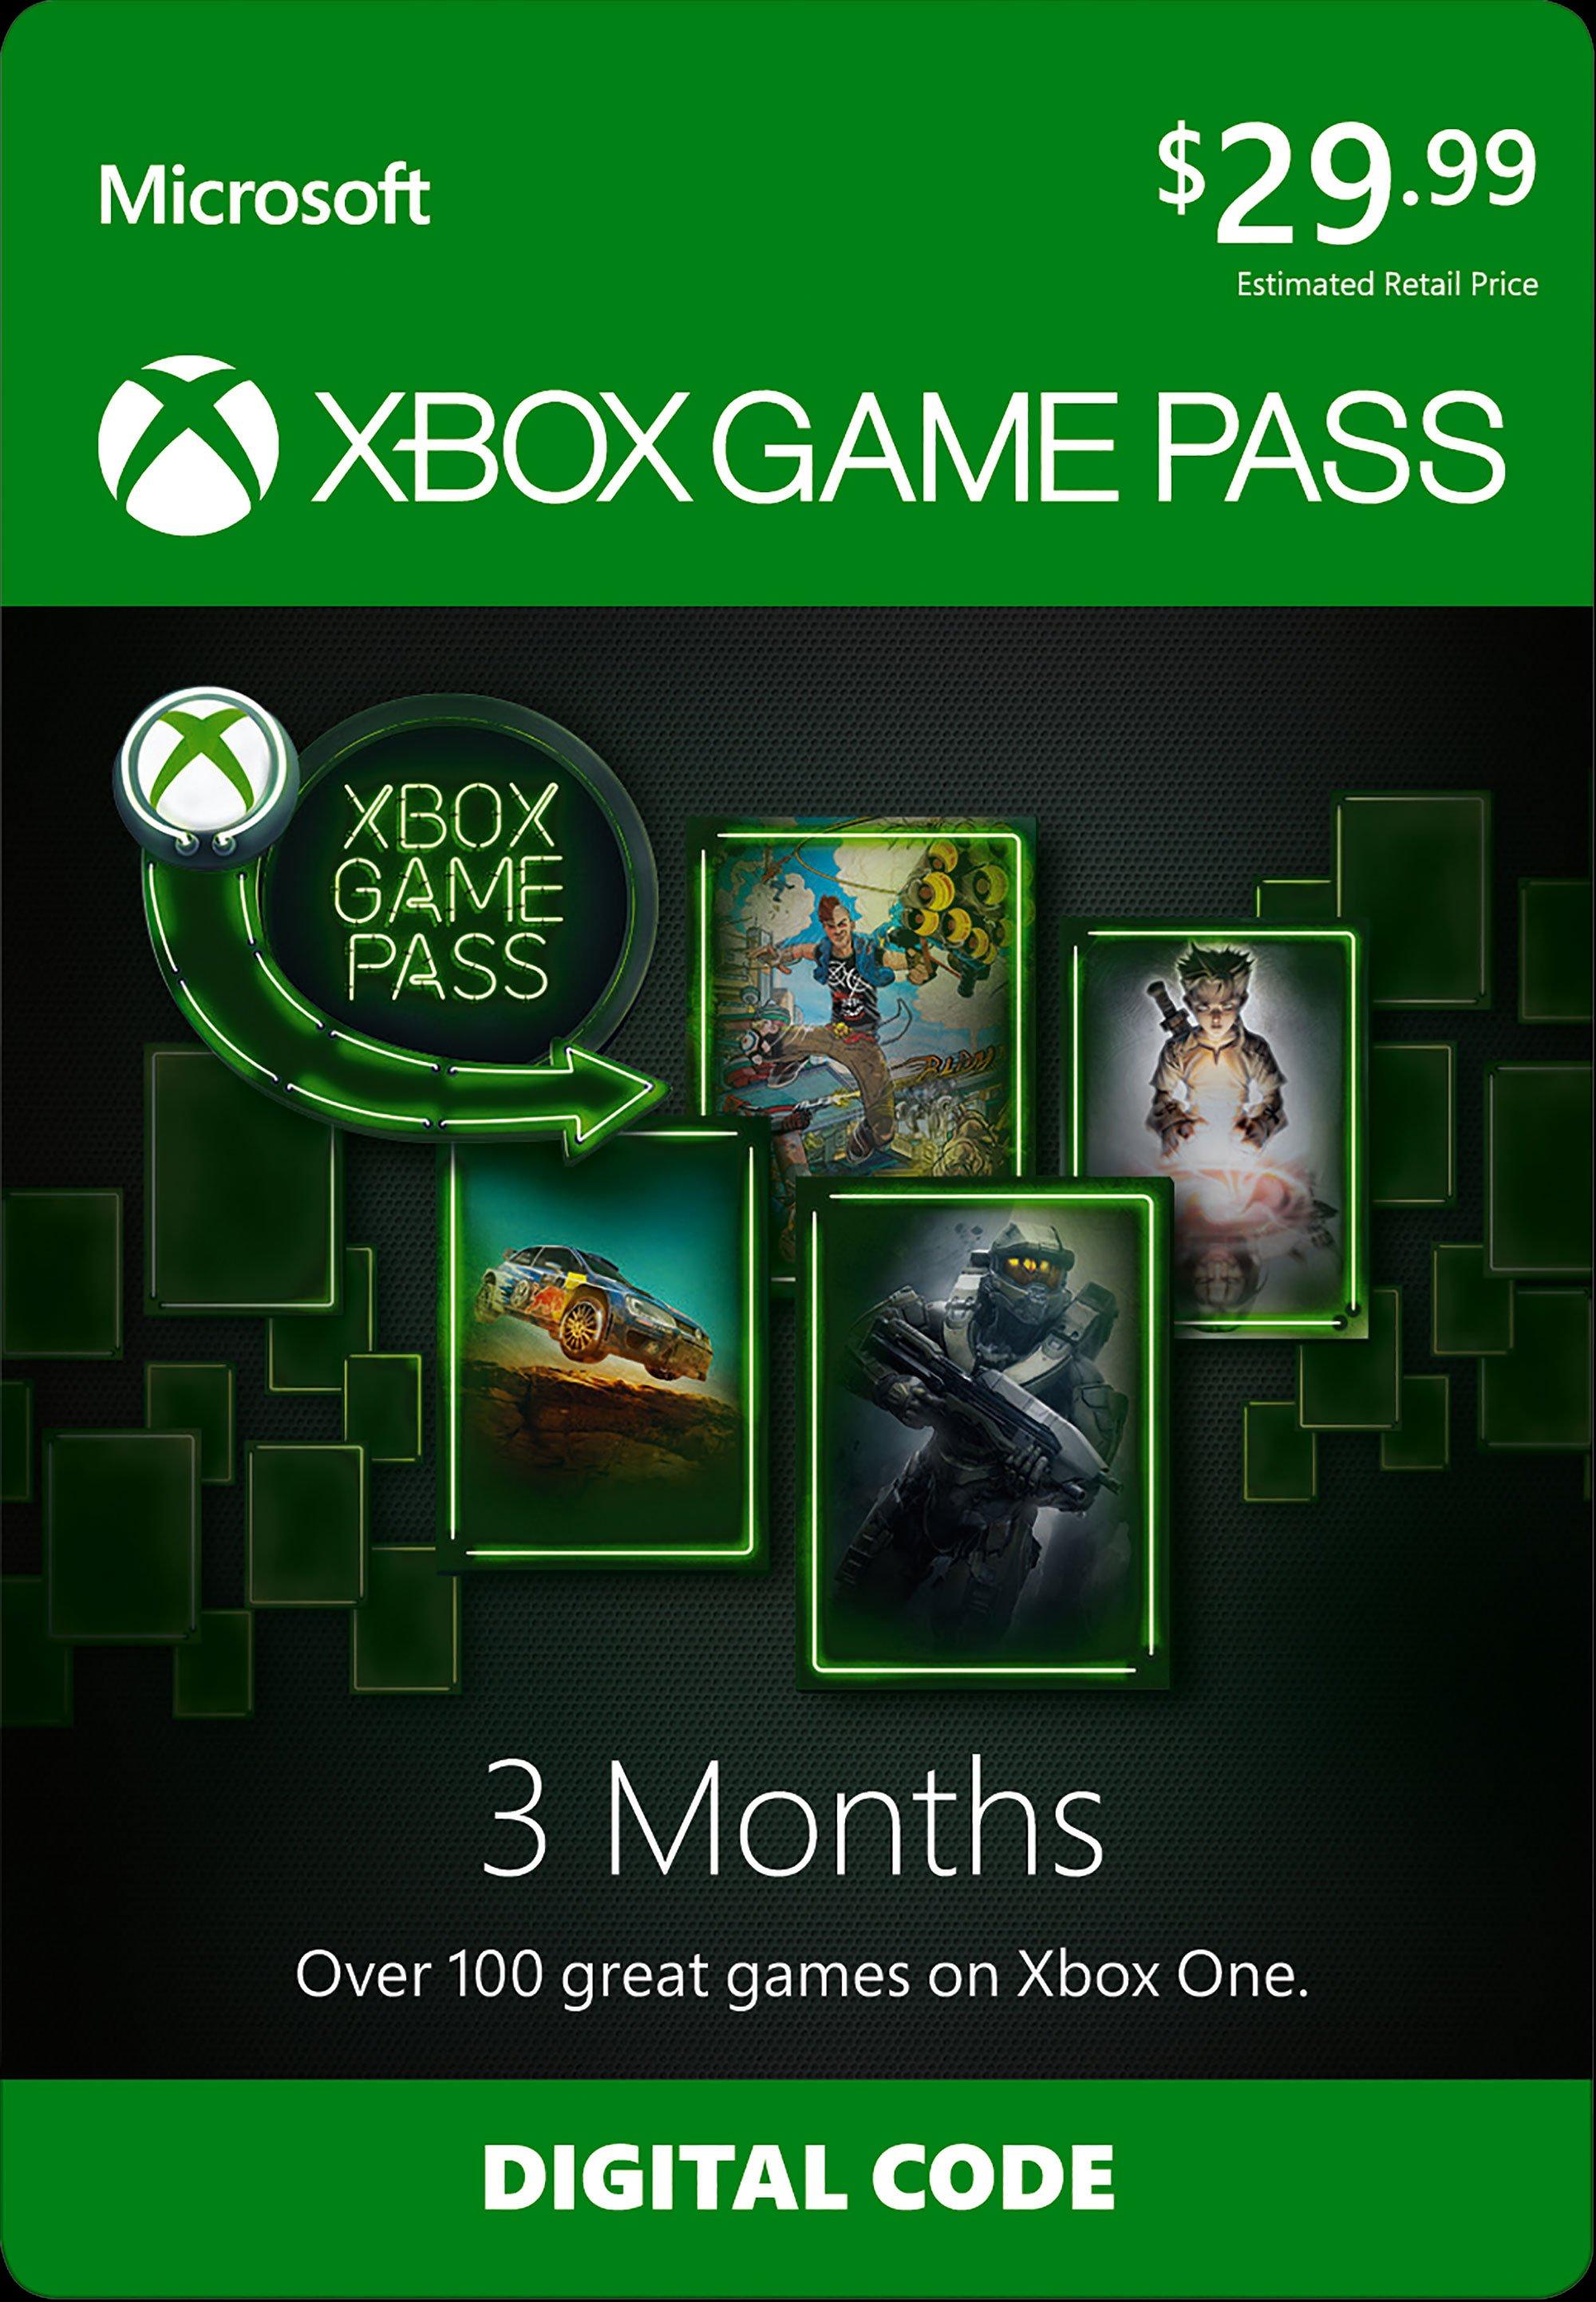 xbox games pass games